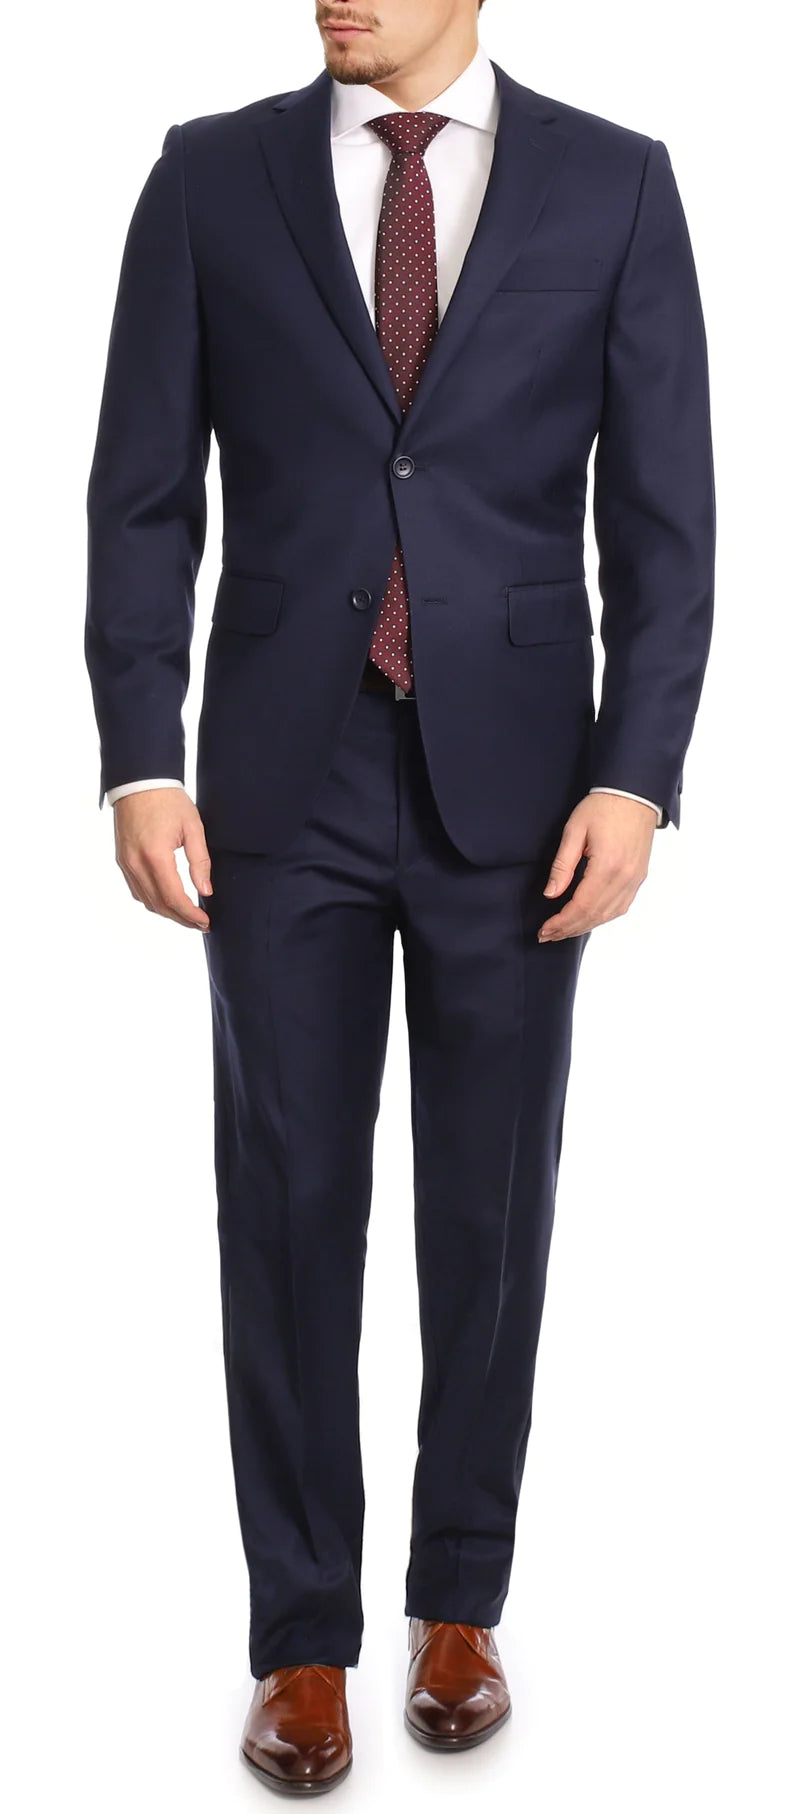 Wedding Suit Guide for the Groom - ethan men